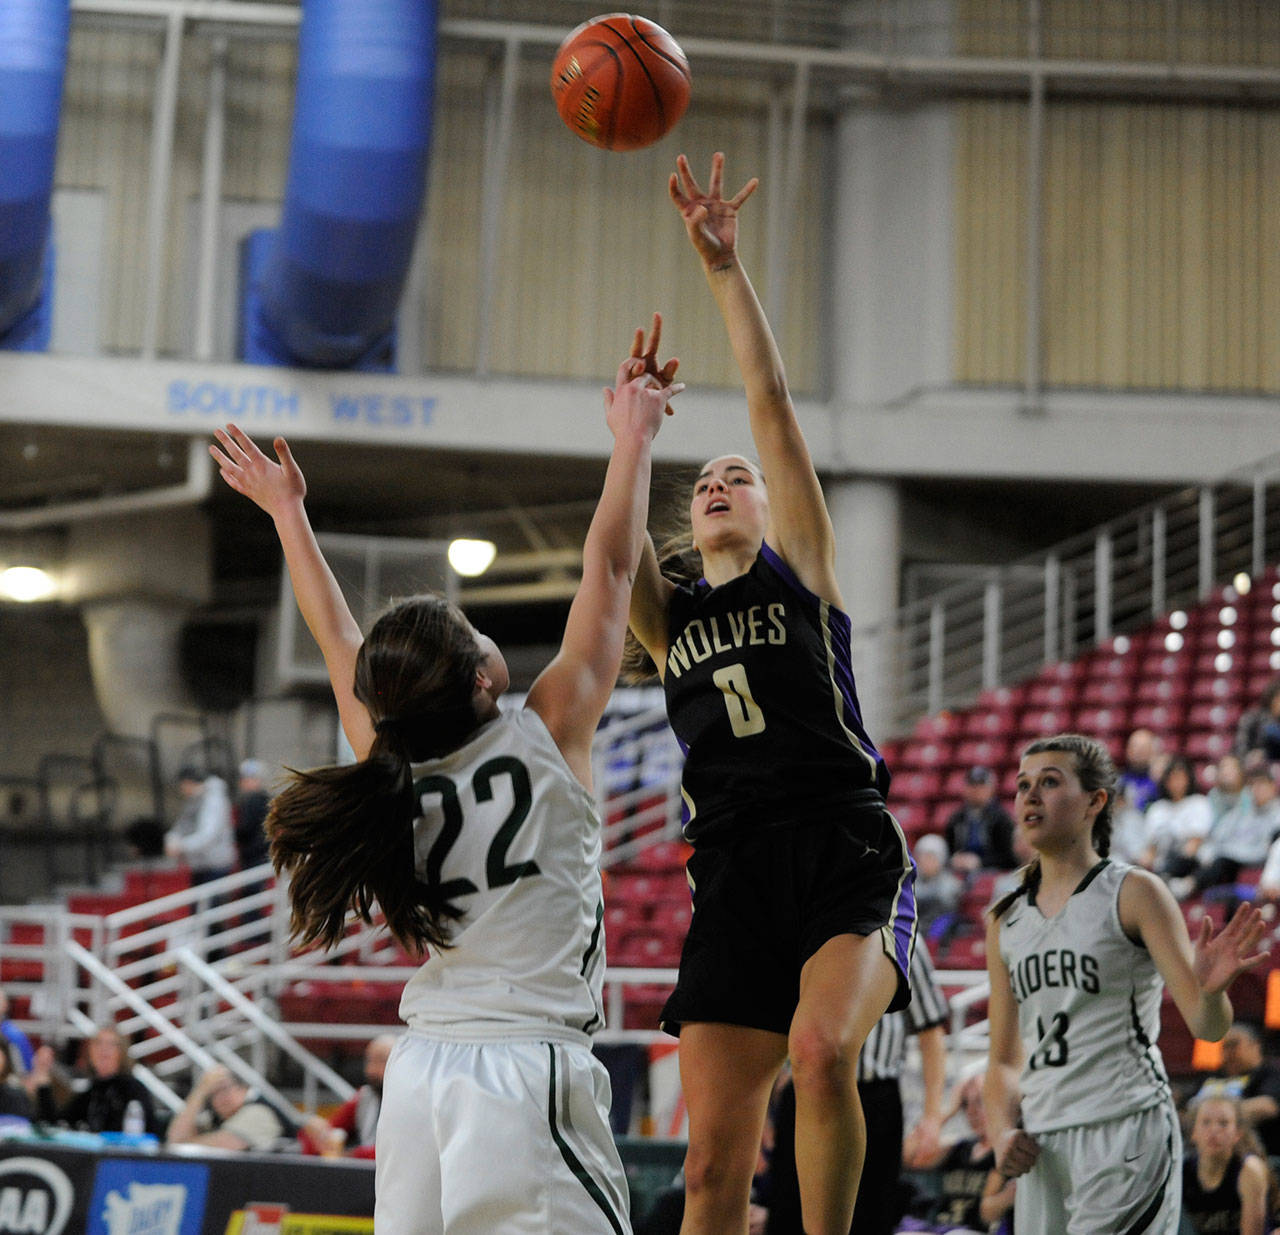 Girls basketball: PA Roughriders end Wolves’ season at state